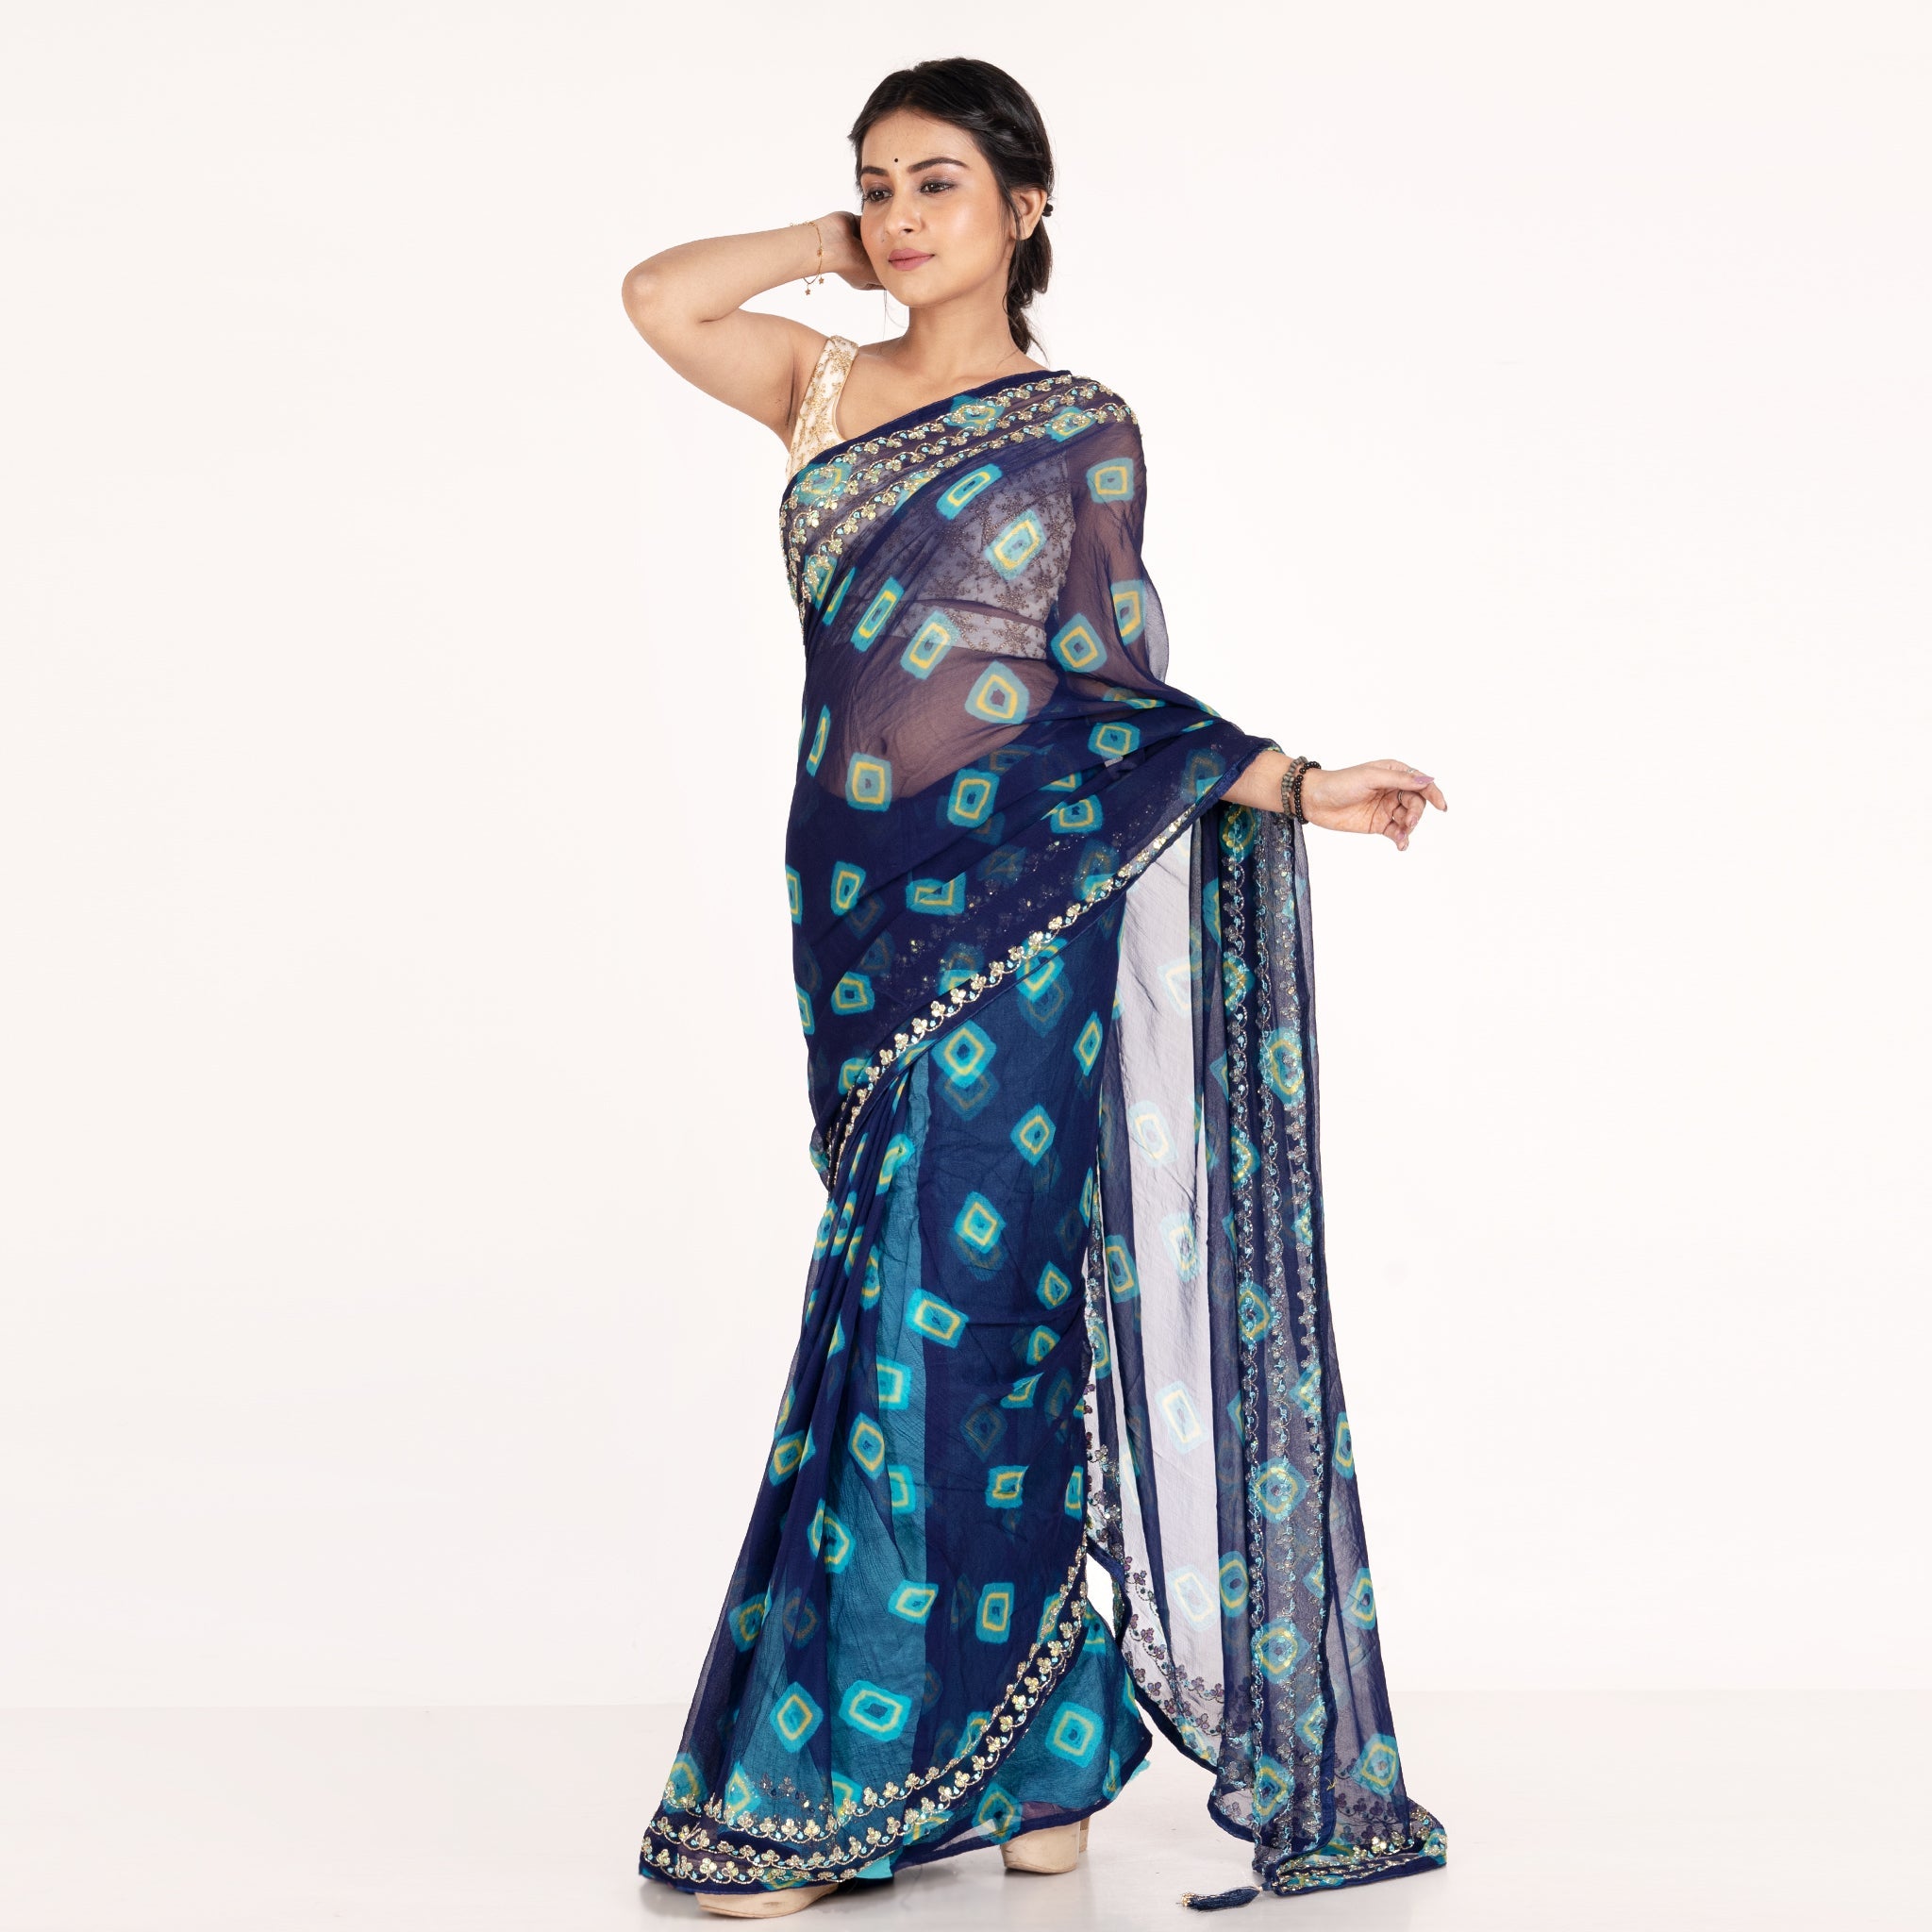 Women's Navy Blue Pure Chiifon Bandhej Motifs Saree With Hand Embroidfered Border - Boveee